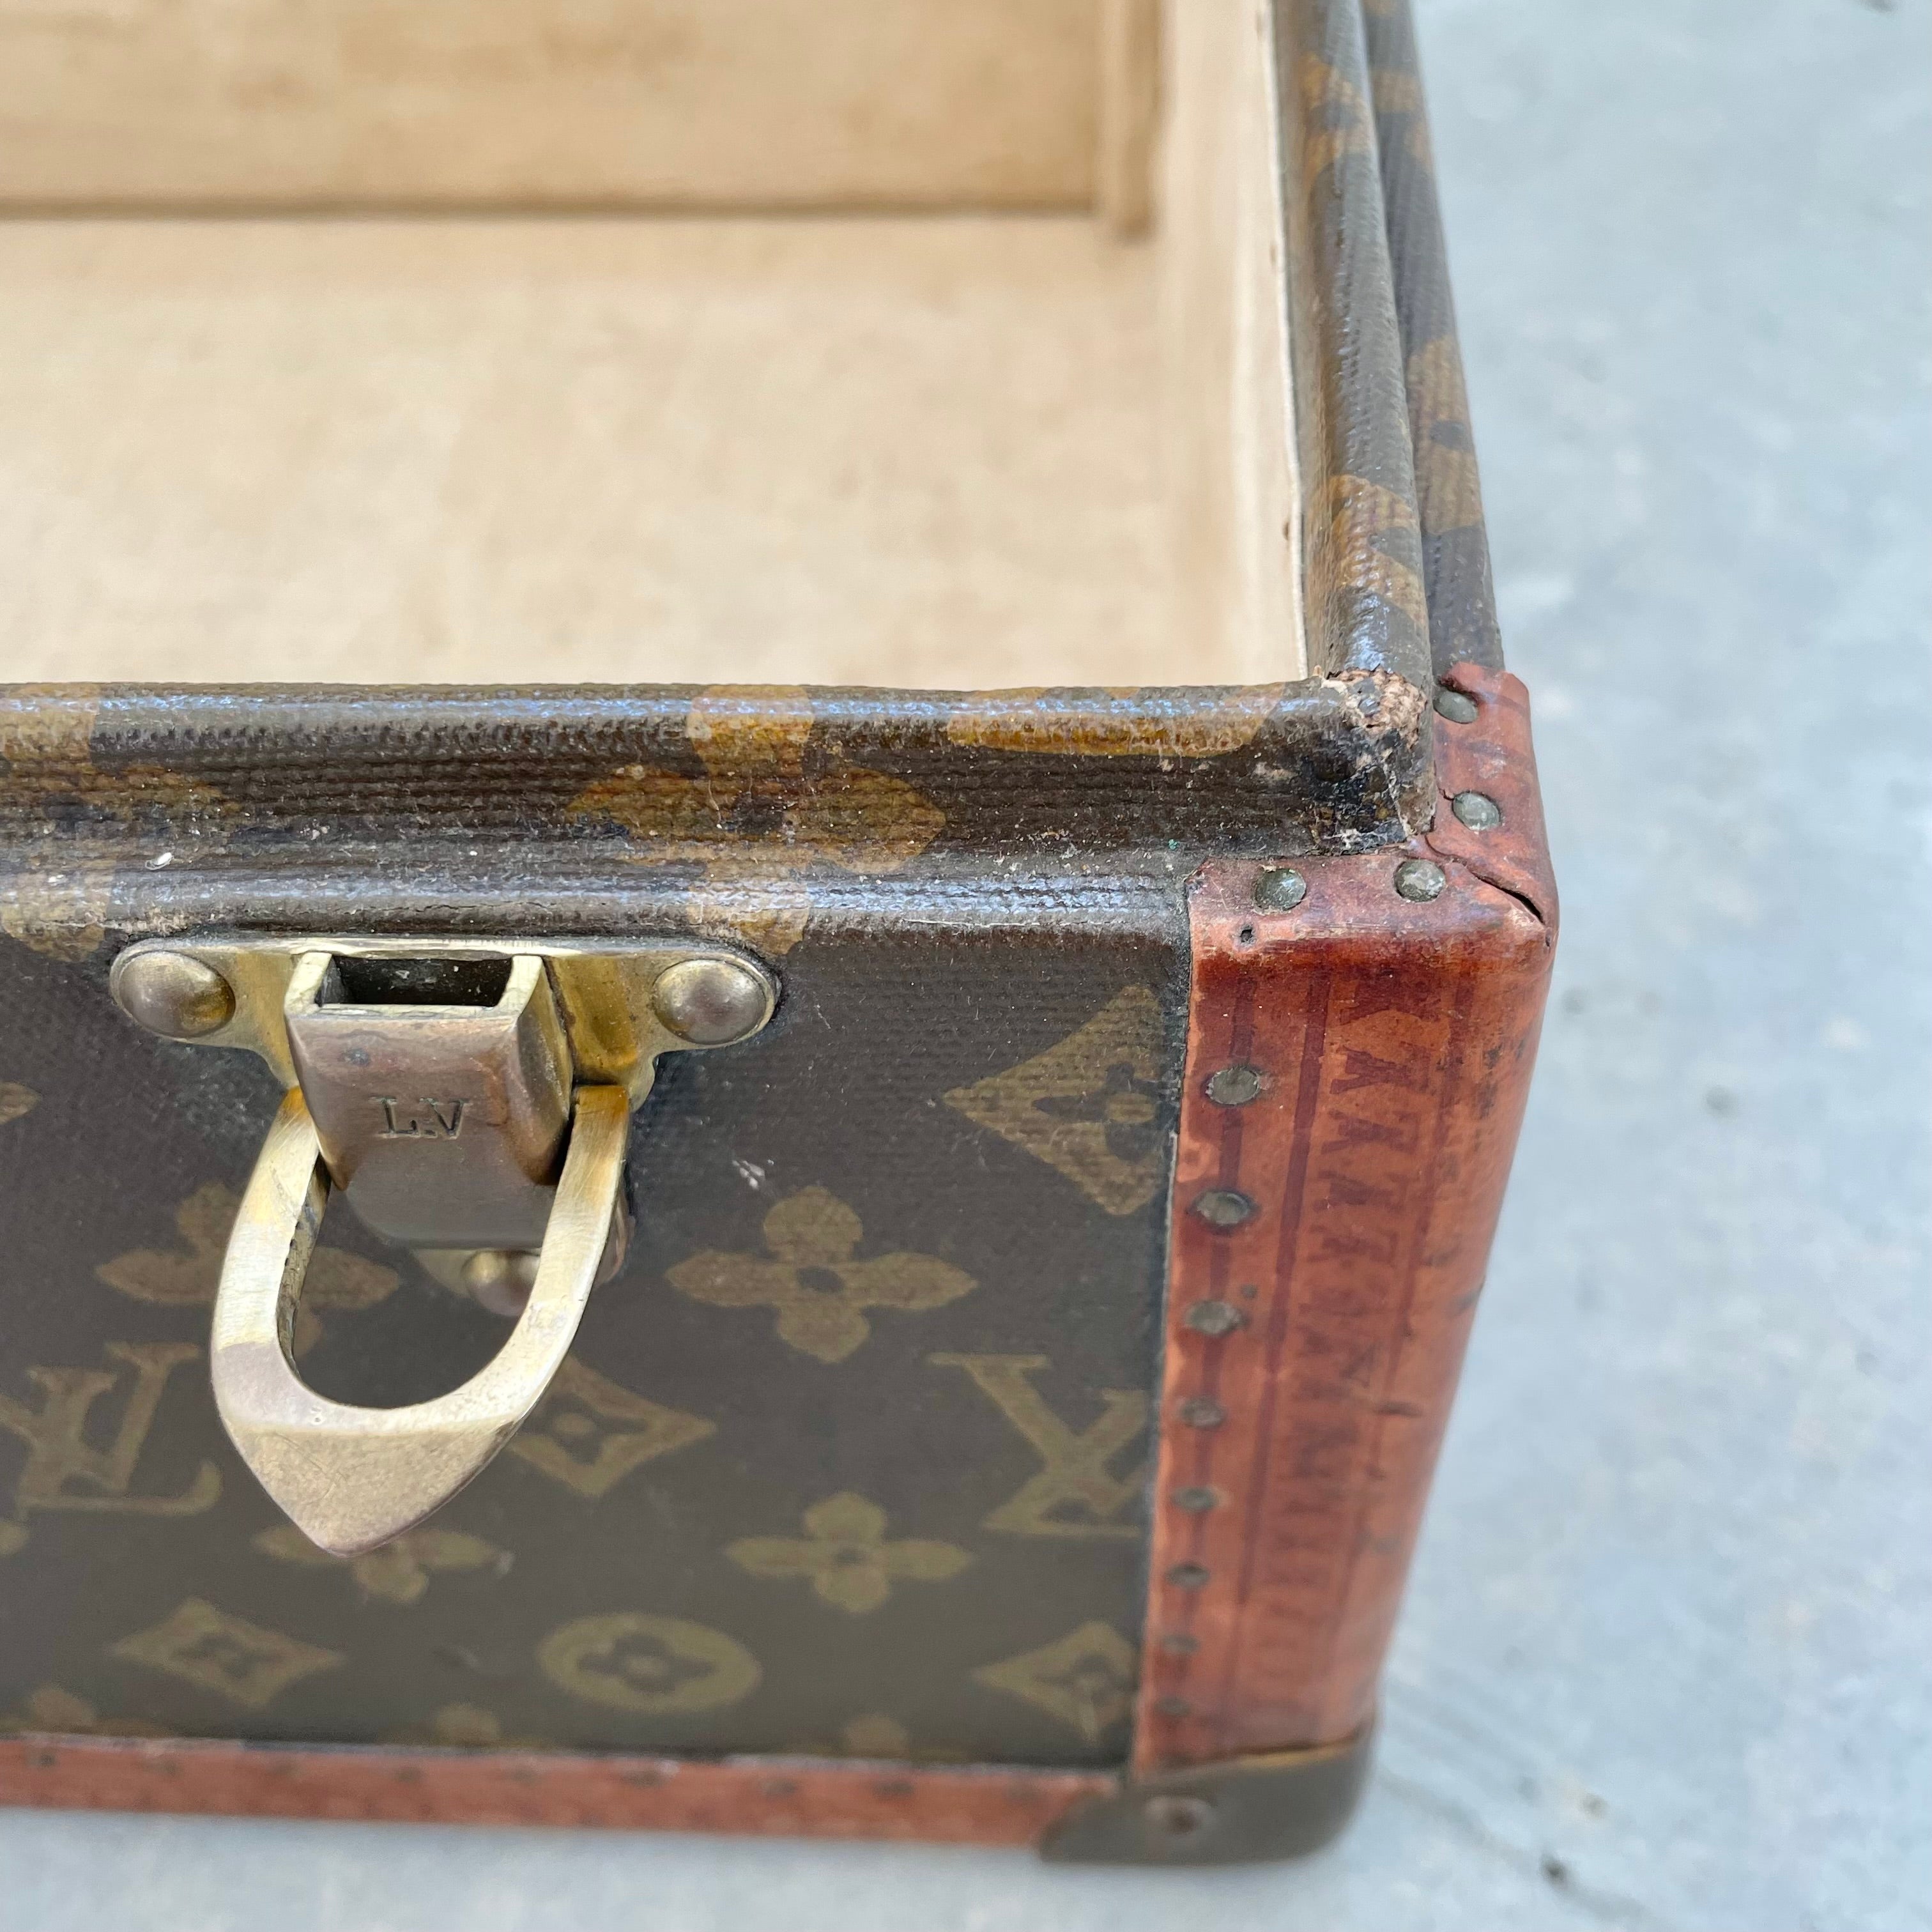 Louis Vuitton Monogram Canvas Cosmetic Case Trunk with Mirror